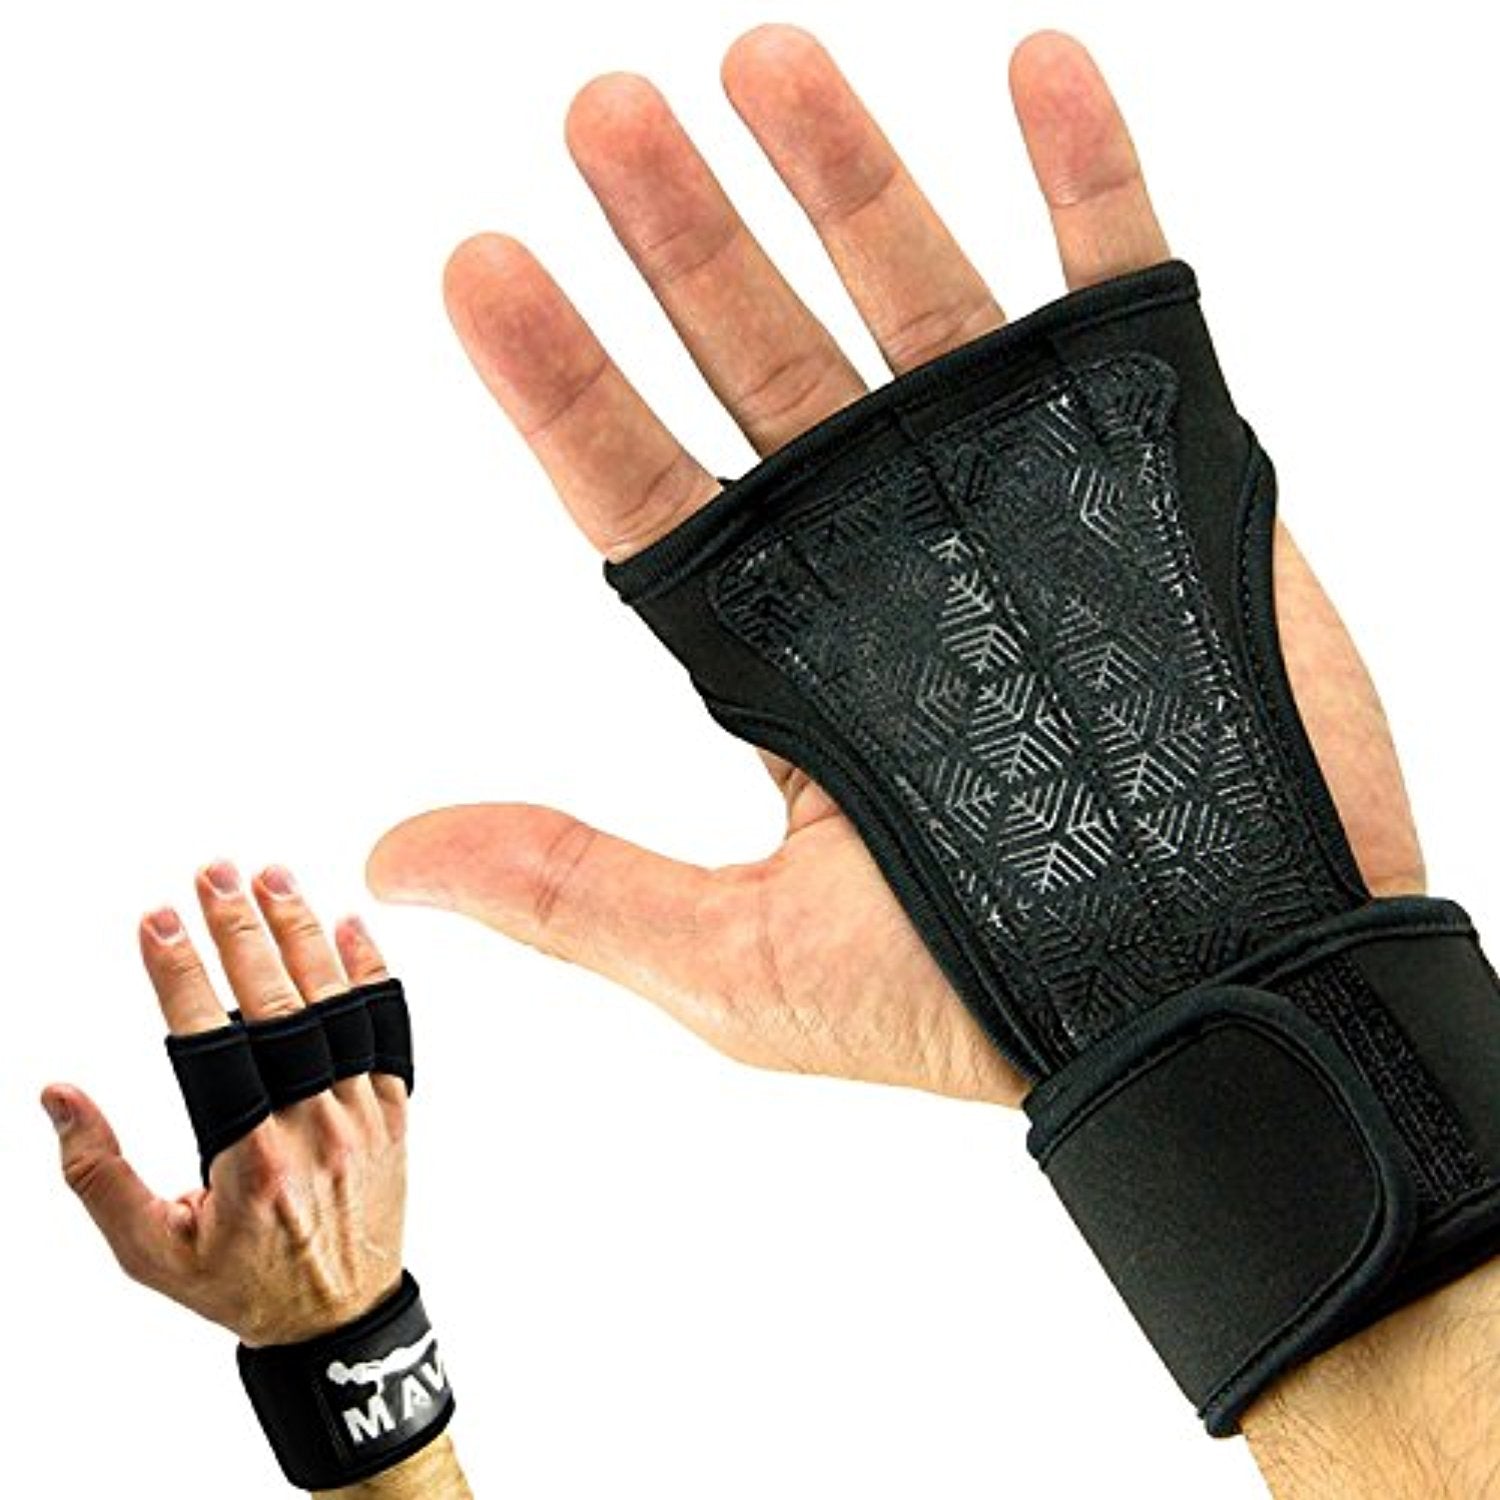 Cross Training Gloves with Wrist Support for Crossfit WODs and Gym Workout - Everyday Crosstrain